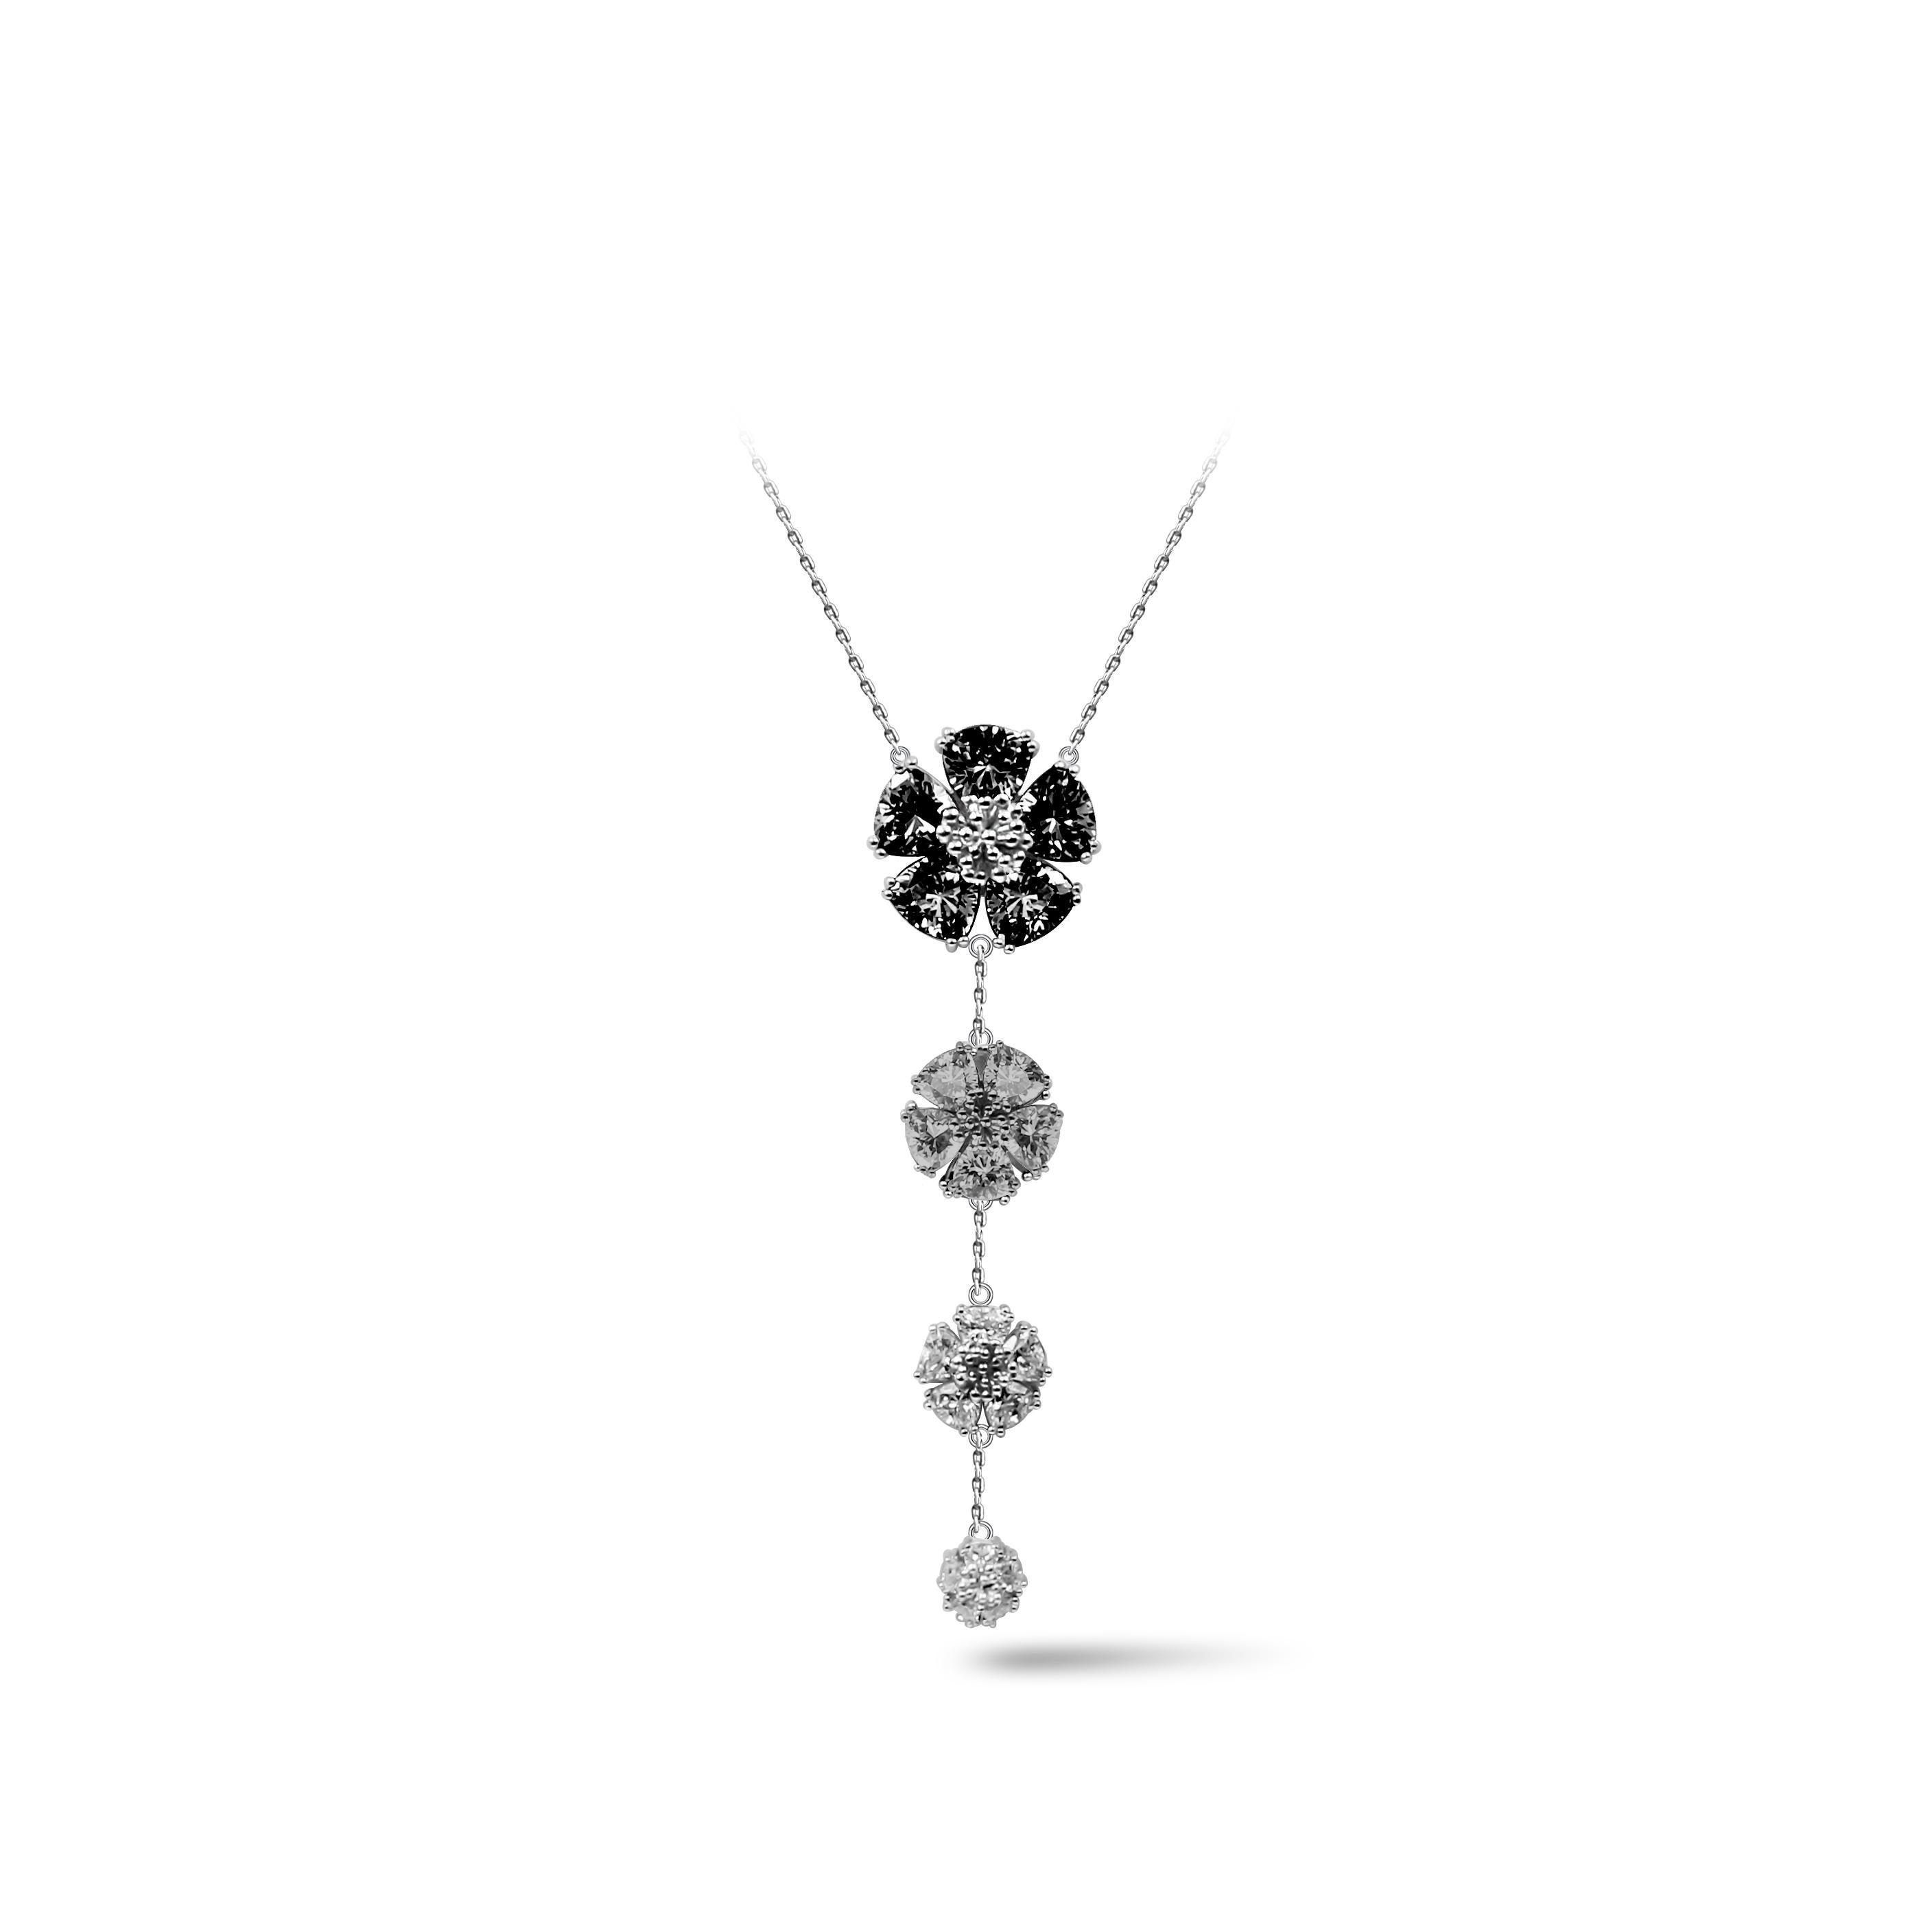 Designed in NYC

.925 Sterling Silver multiple White Topaz, Gray and Black Spinel Graduated Blossom Stone Lariat Necklace. No matter the season, allow natural beauty to surround you wherever you go. Graduated blossom stone lariat necklace: